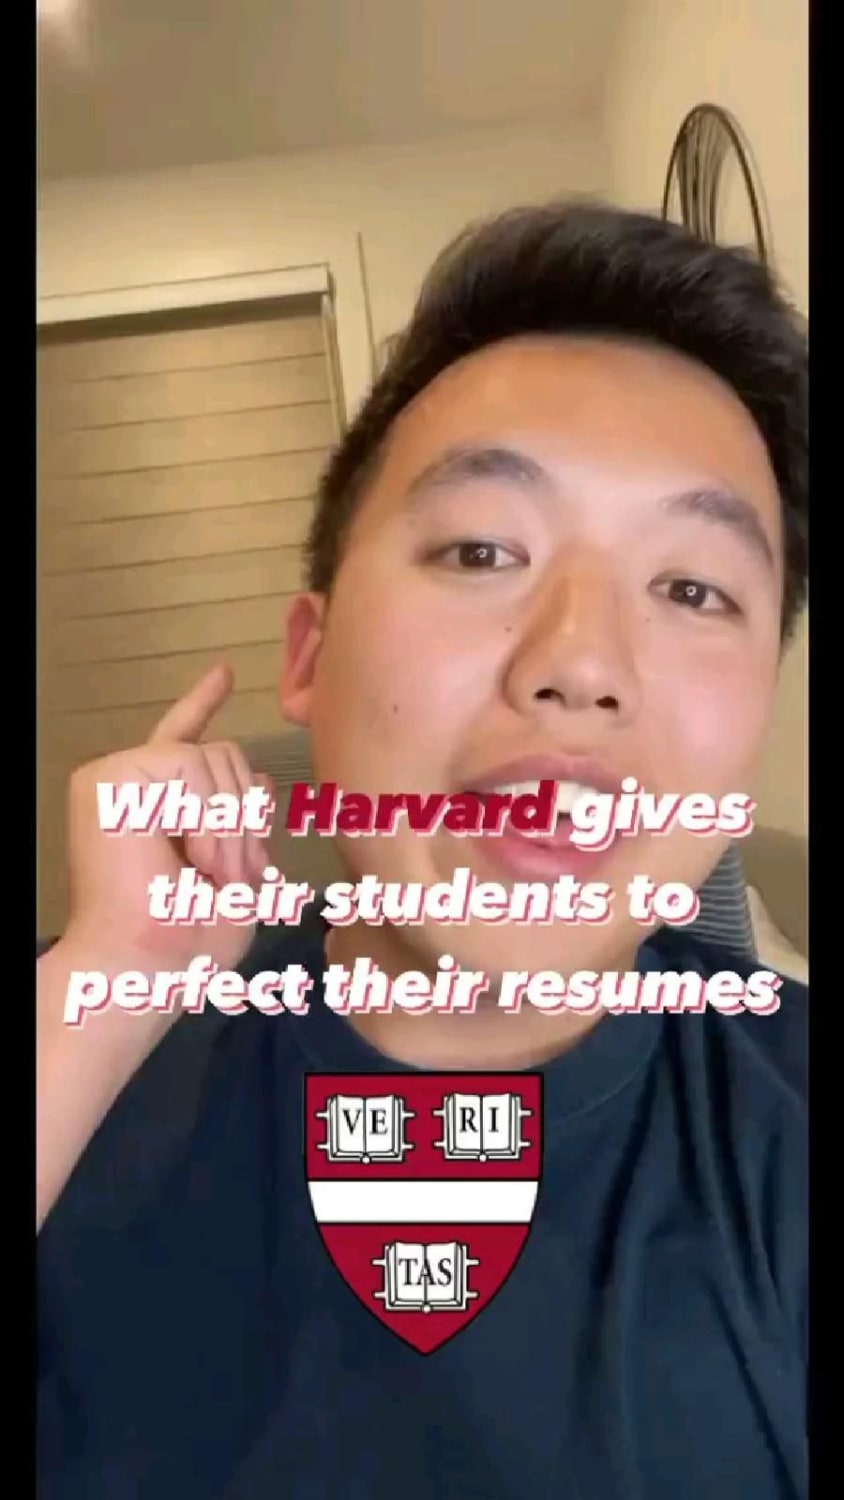 What Harvard gives their students to perfect their resumes.